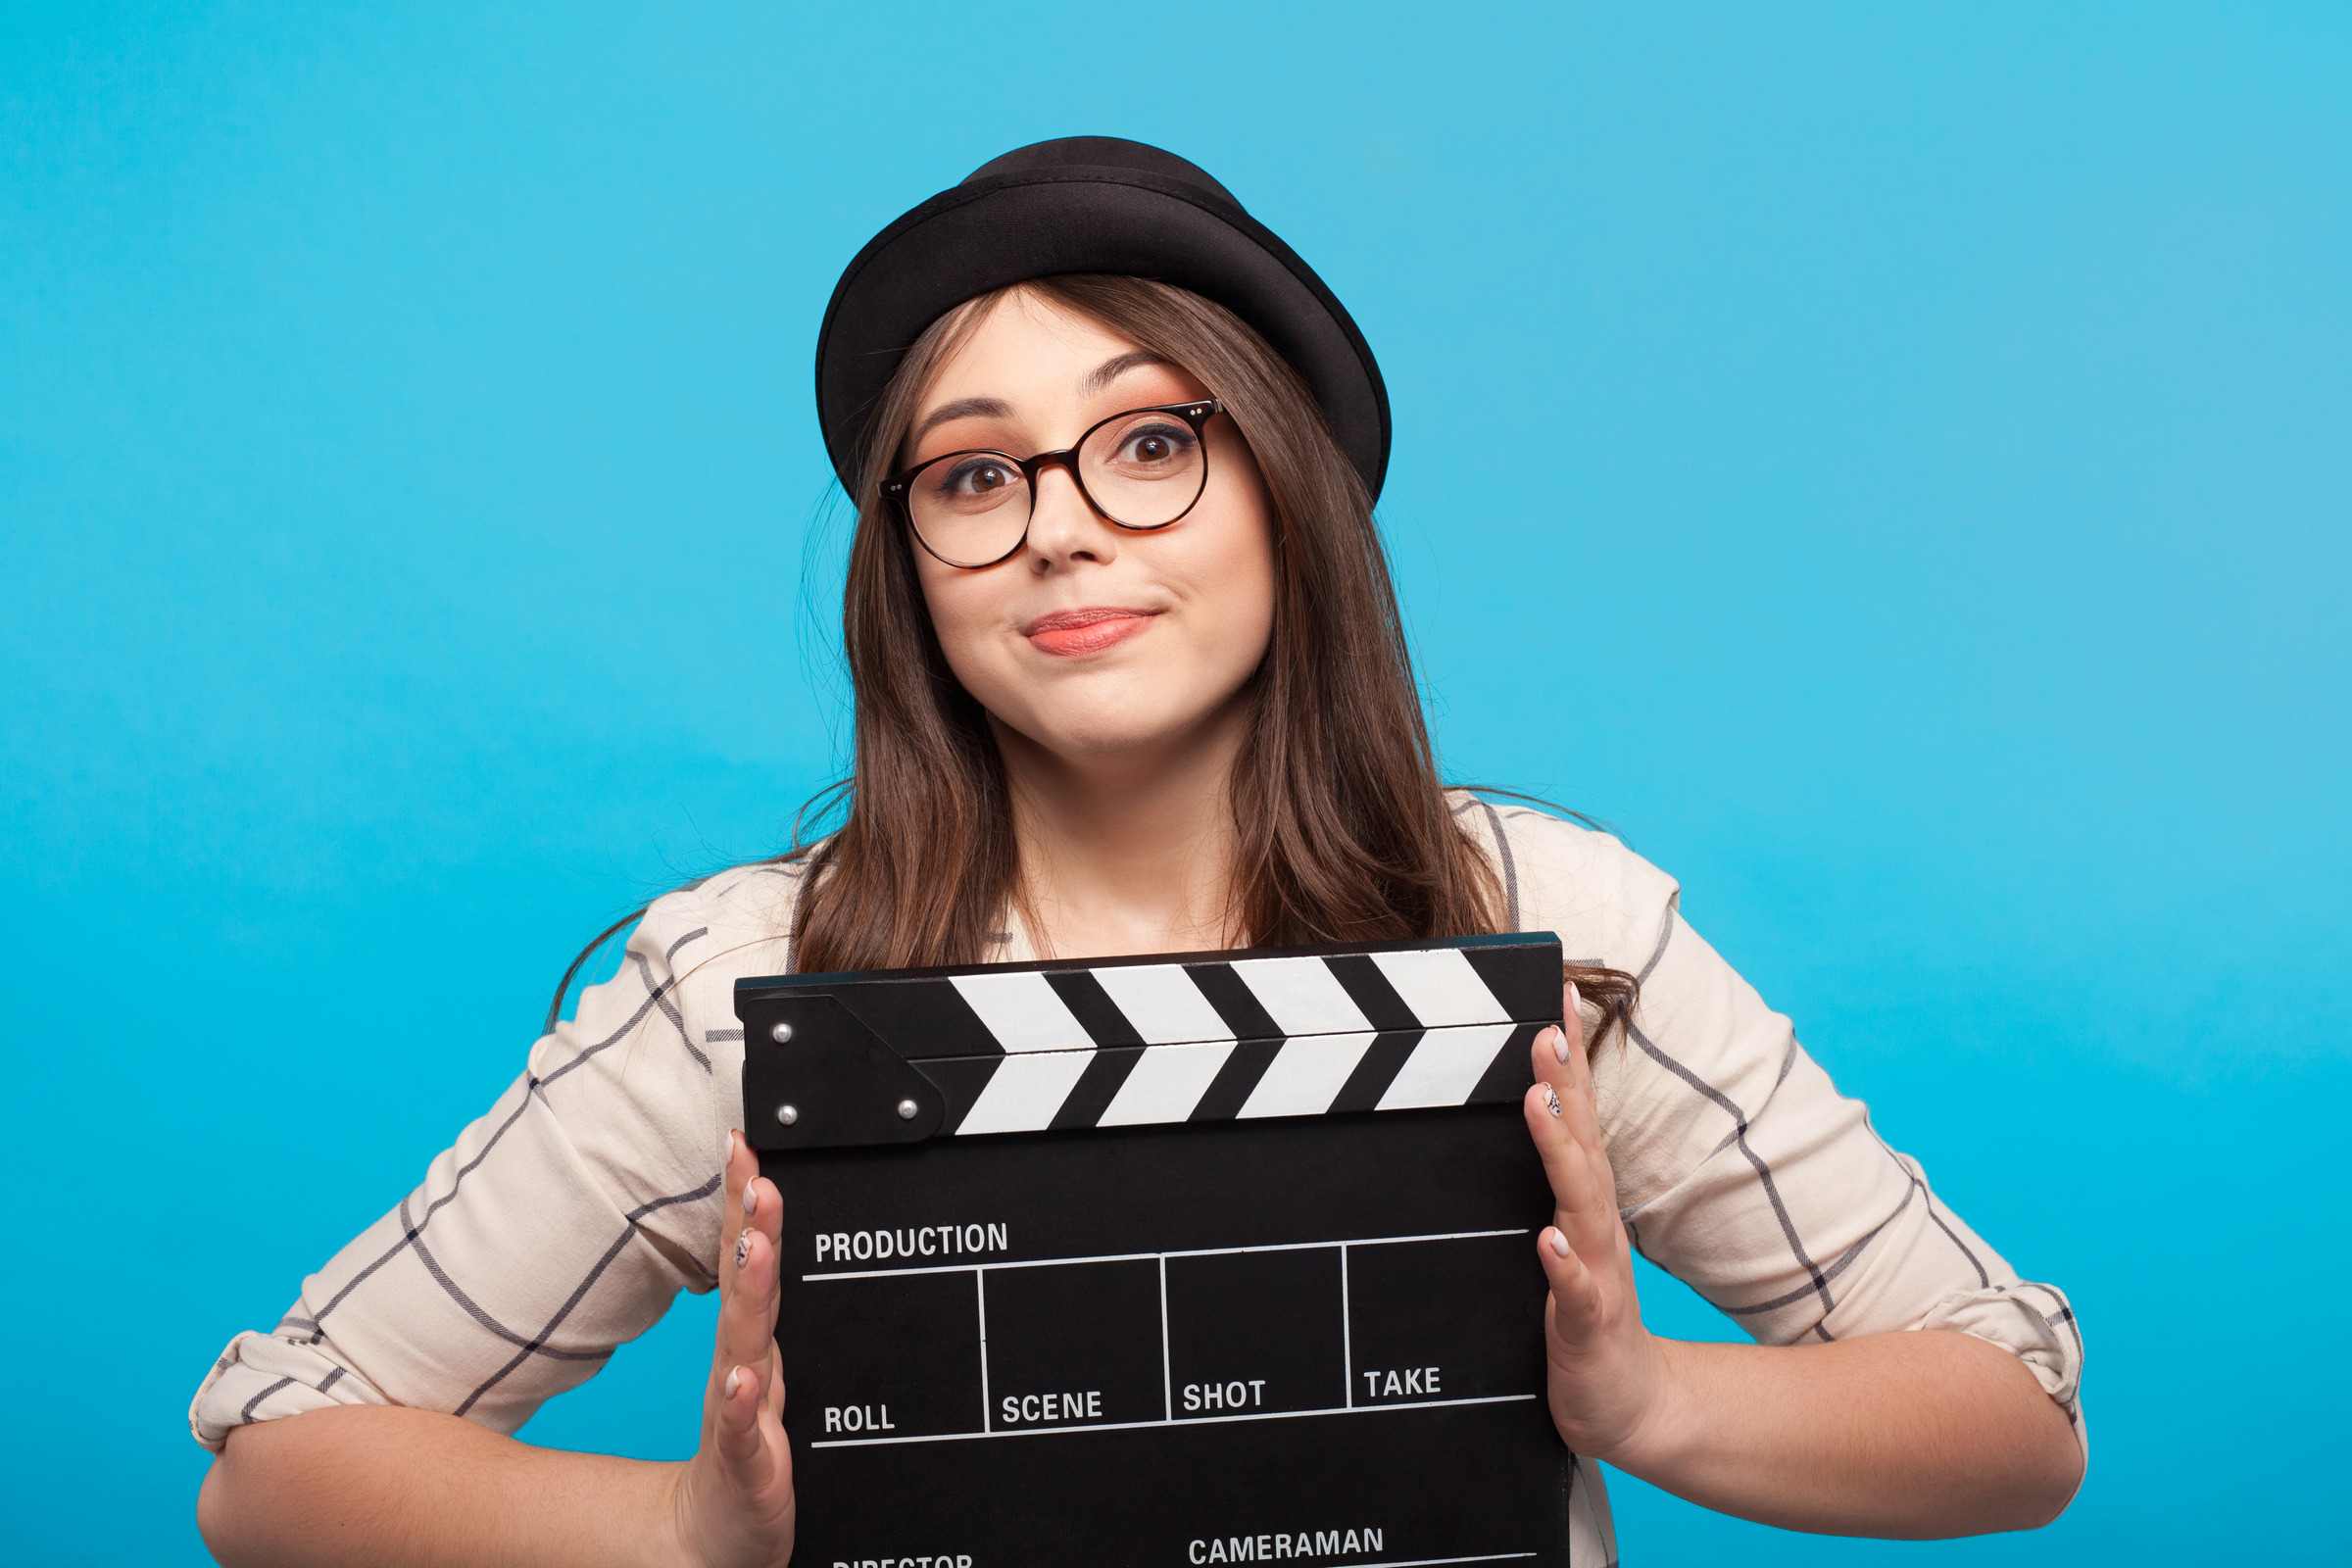 Girl holding clapperboard in front of a blue background.